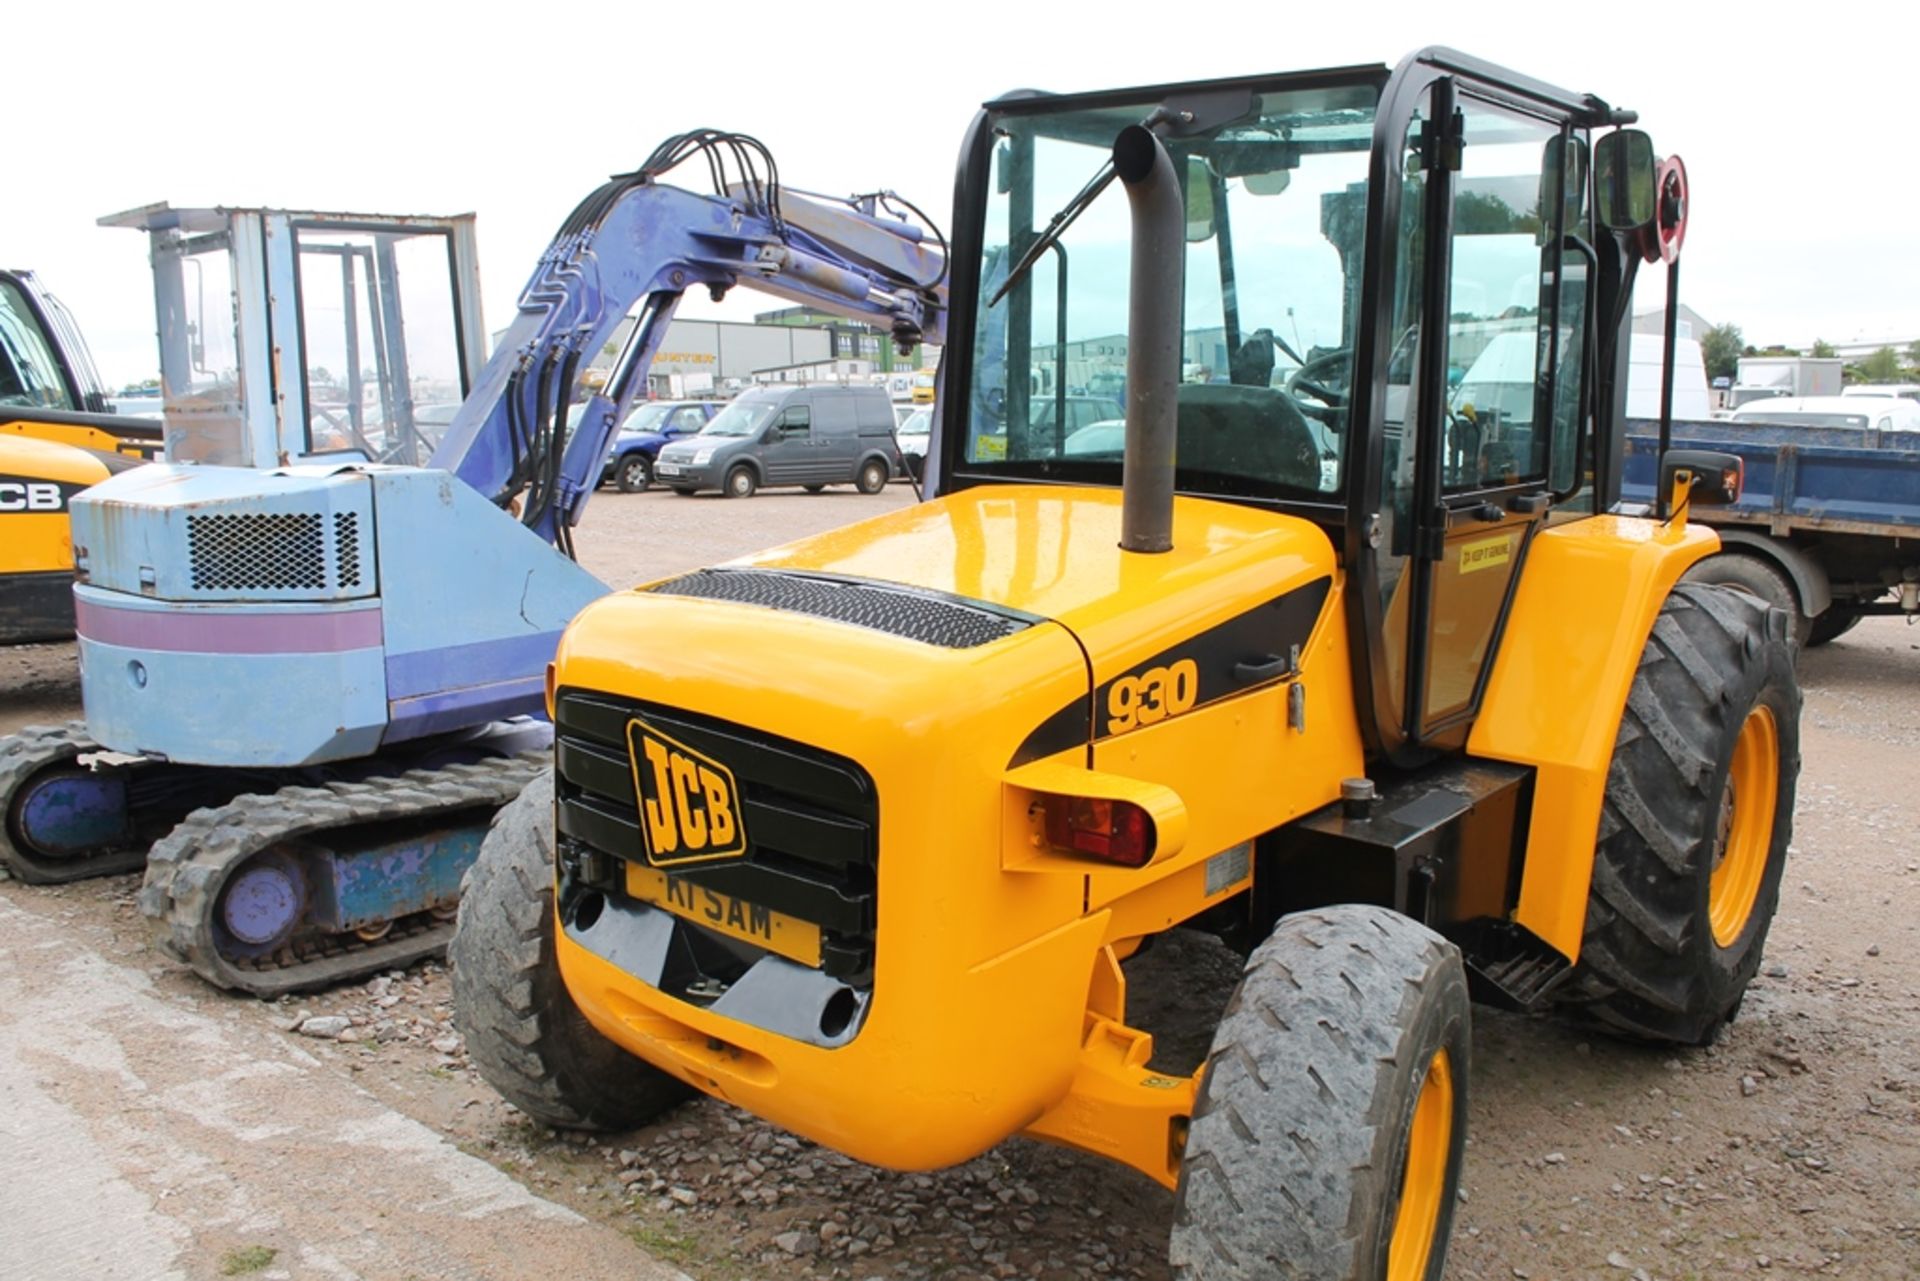 K1 SAM, , JCB 930 4WD, , 18, 143 HOURS - UNCHECKED, , YEAR 2003, , PLUS VAT, - Image 3 of 5